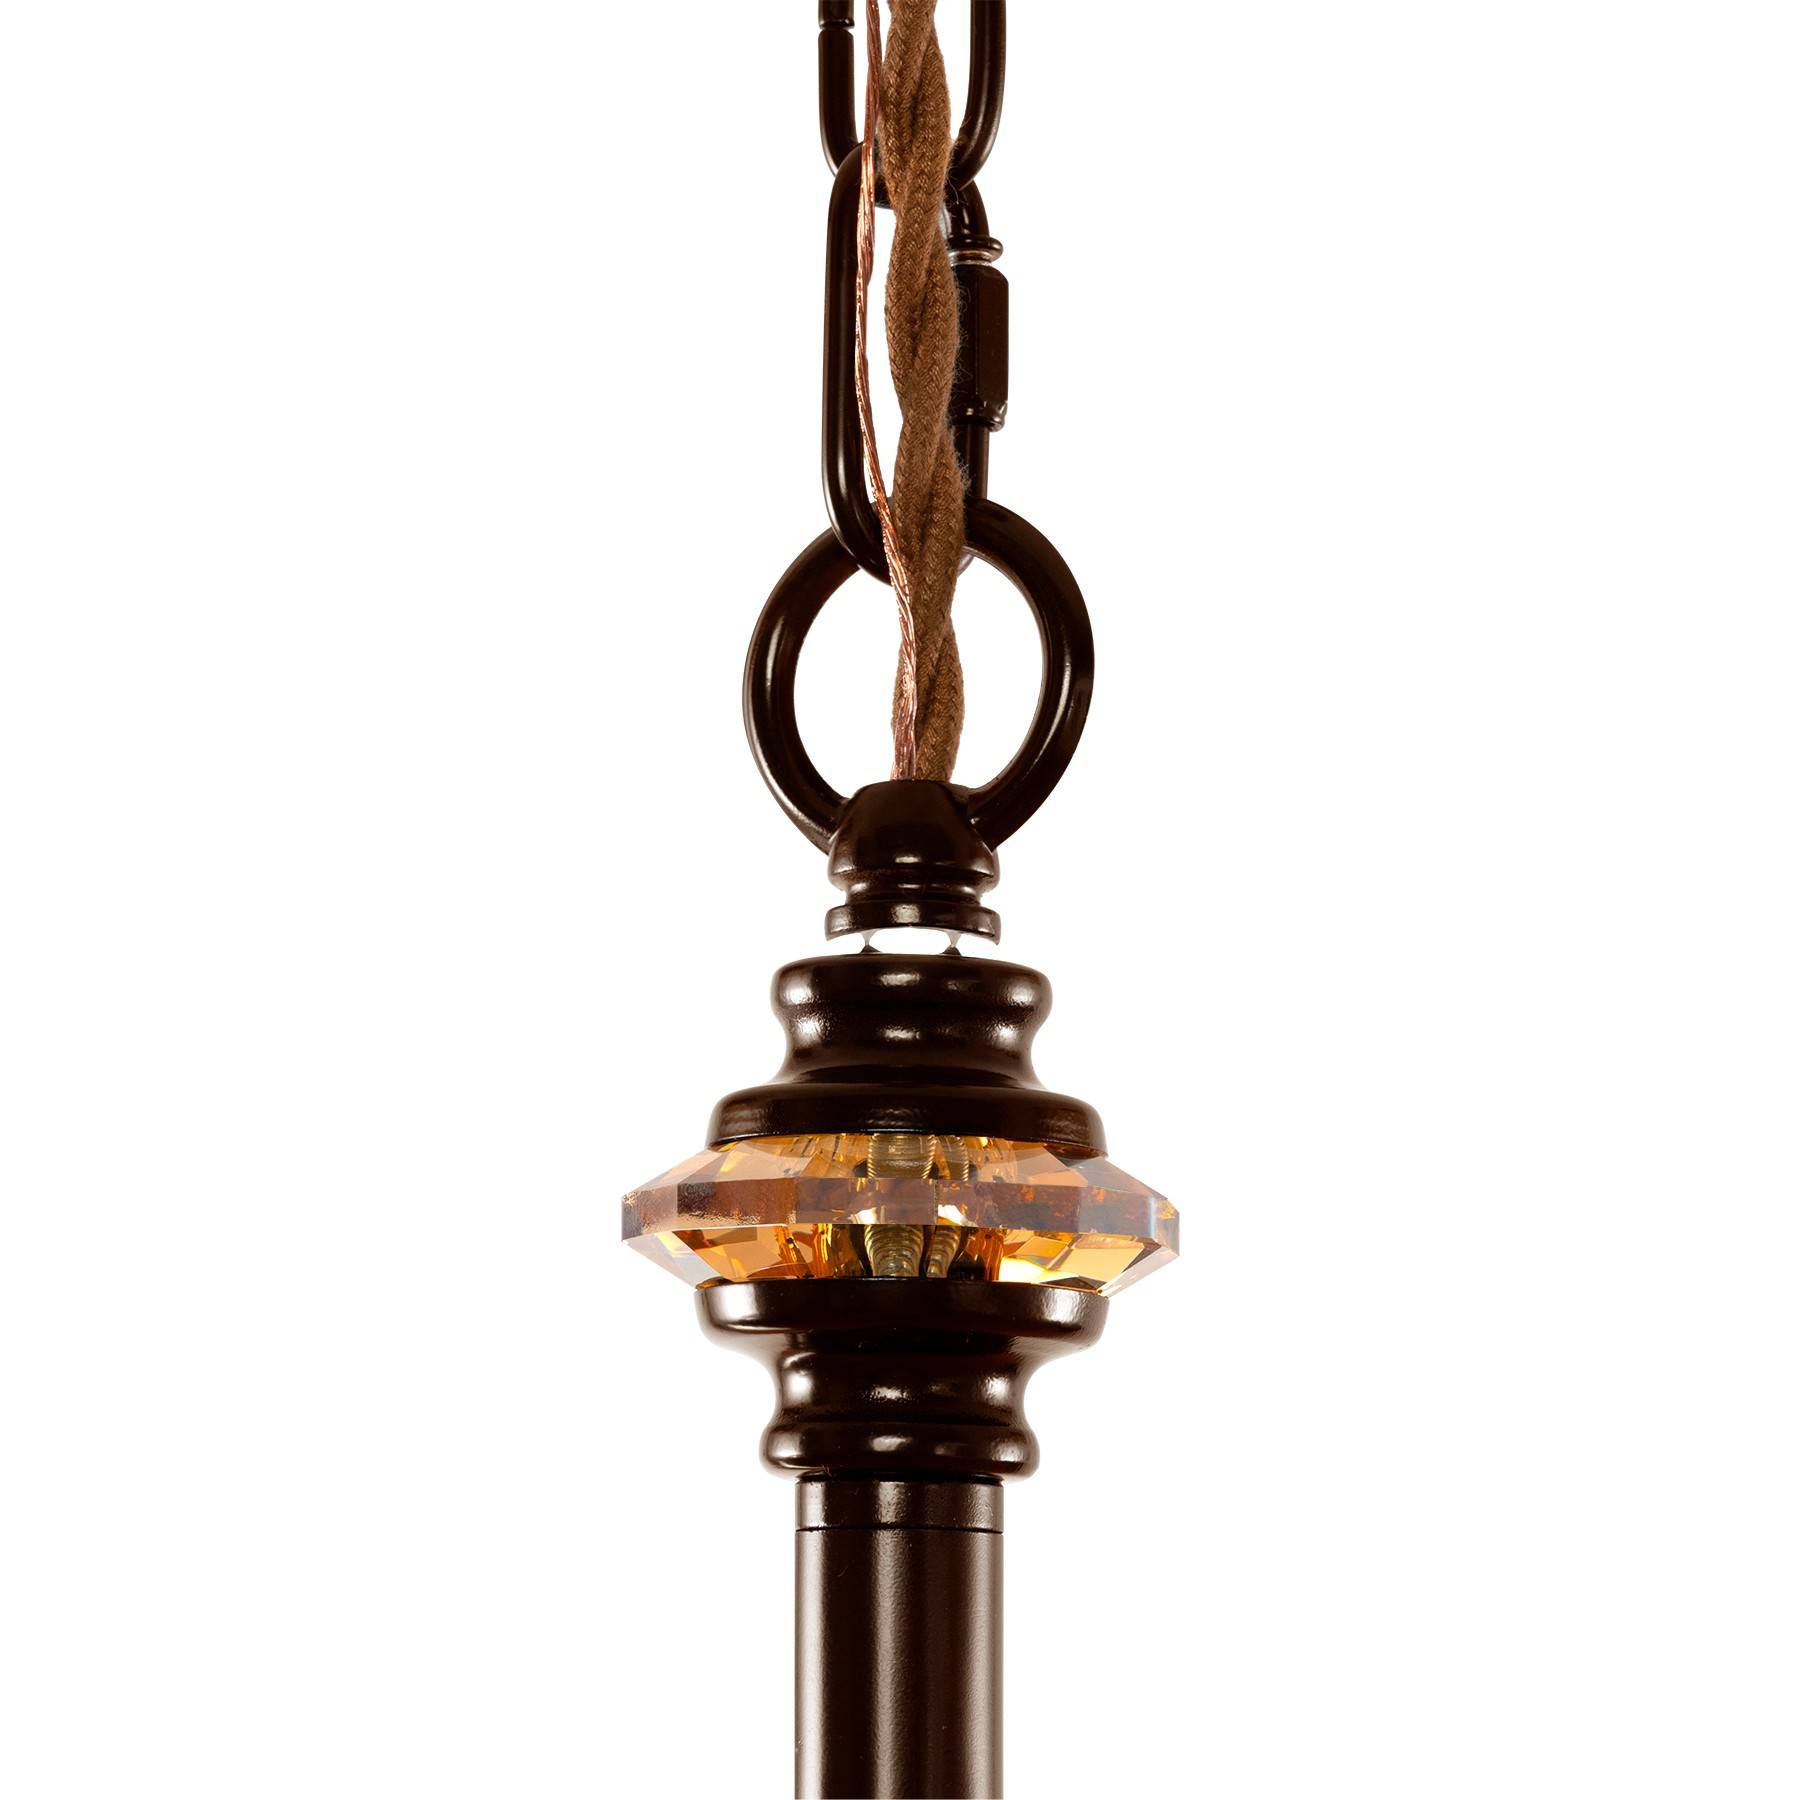 Countryroad Handblown Oil Rubbed Bronze Pendant Light With Amber Glass Shade Handblown Oil Rubbed Bronze Pendant